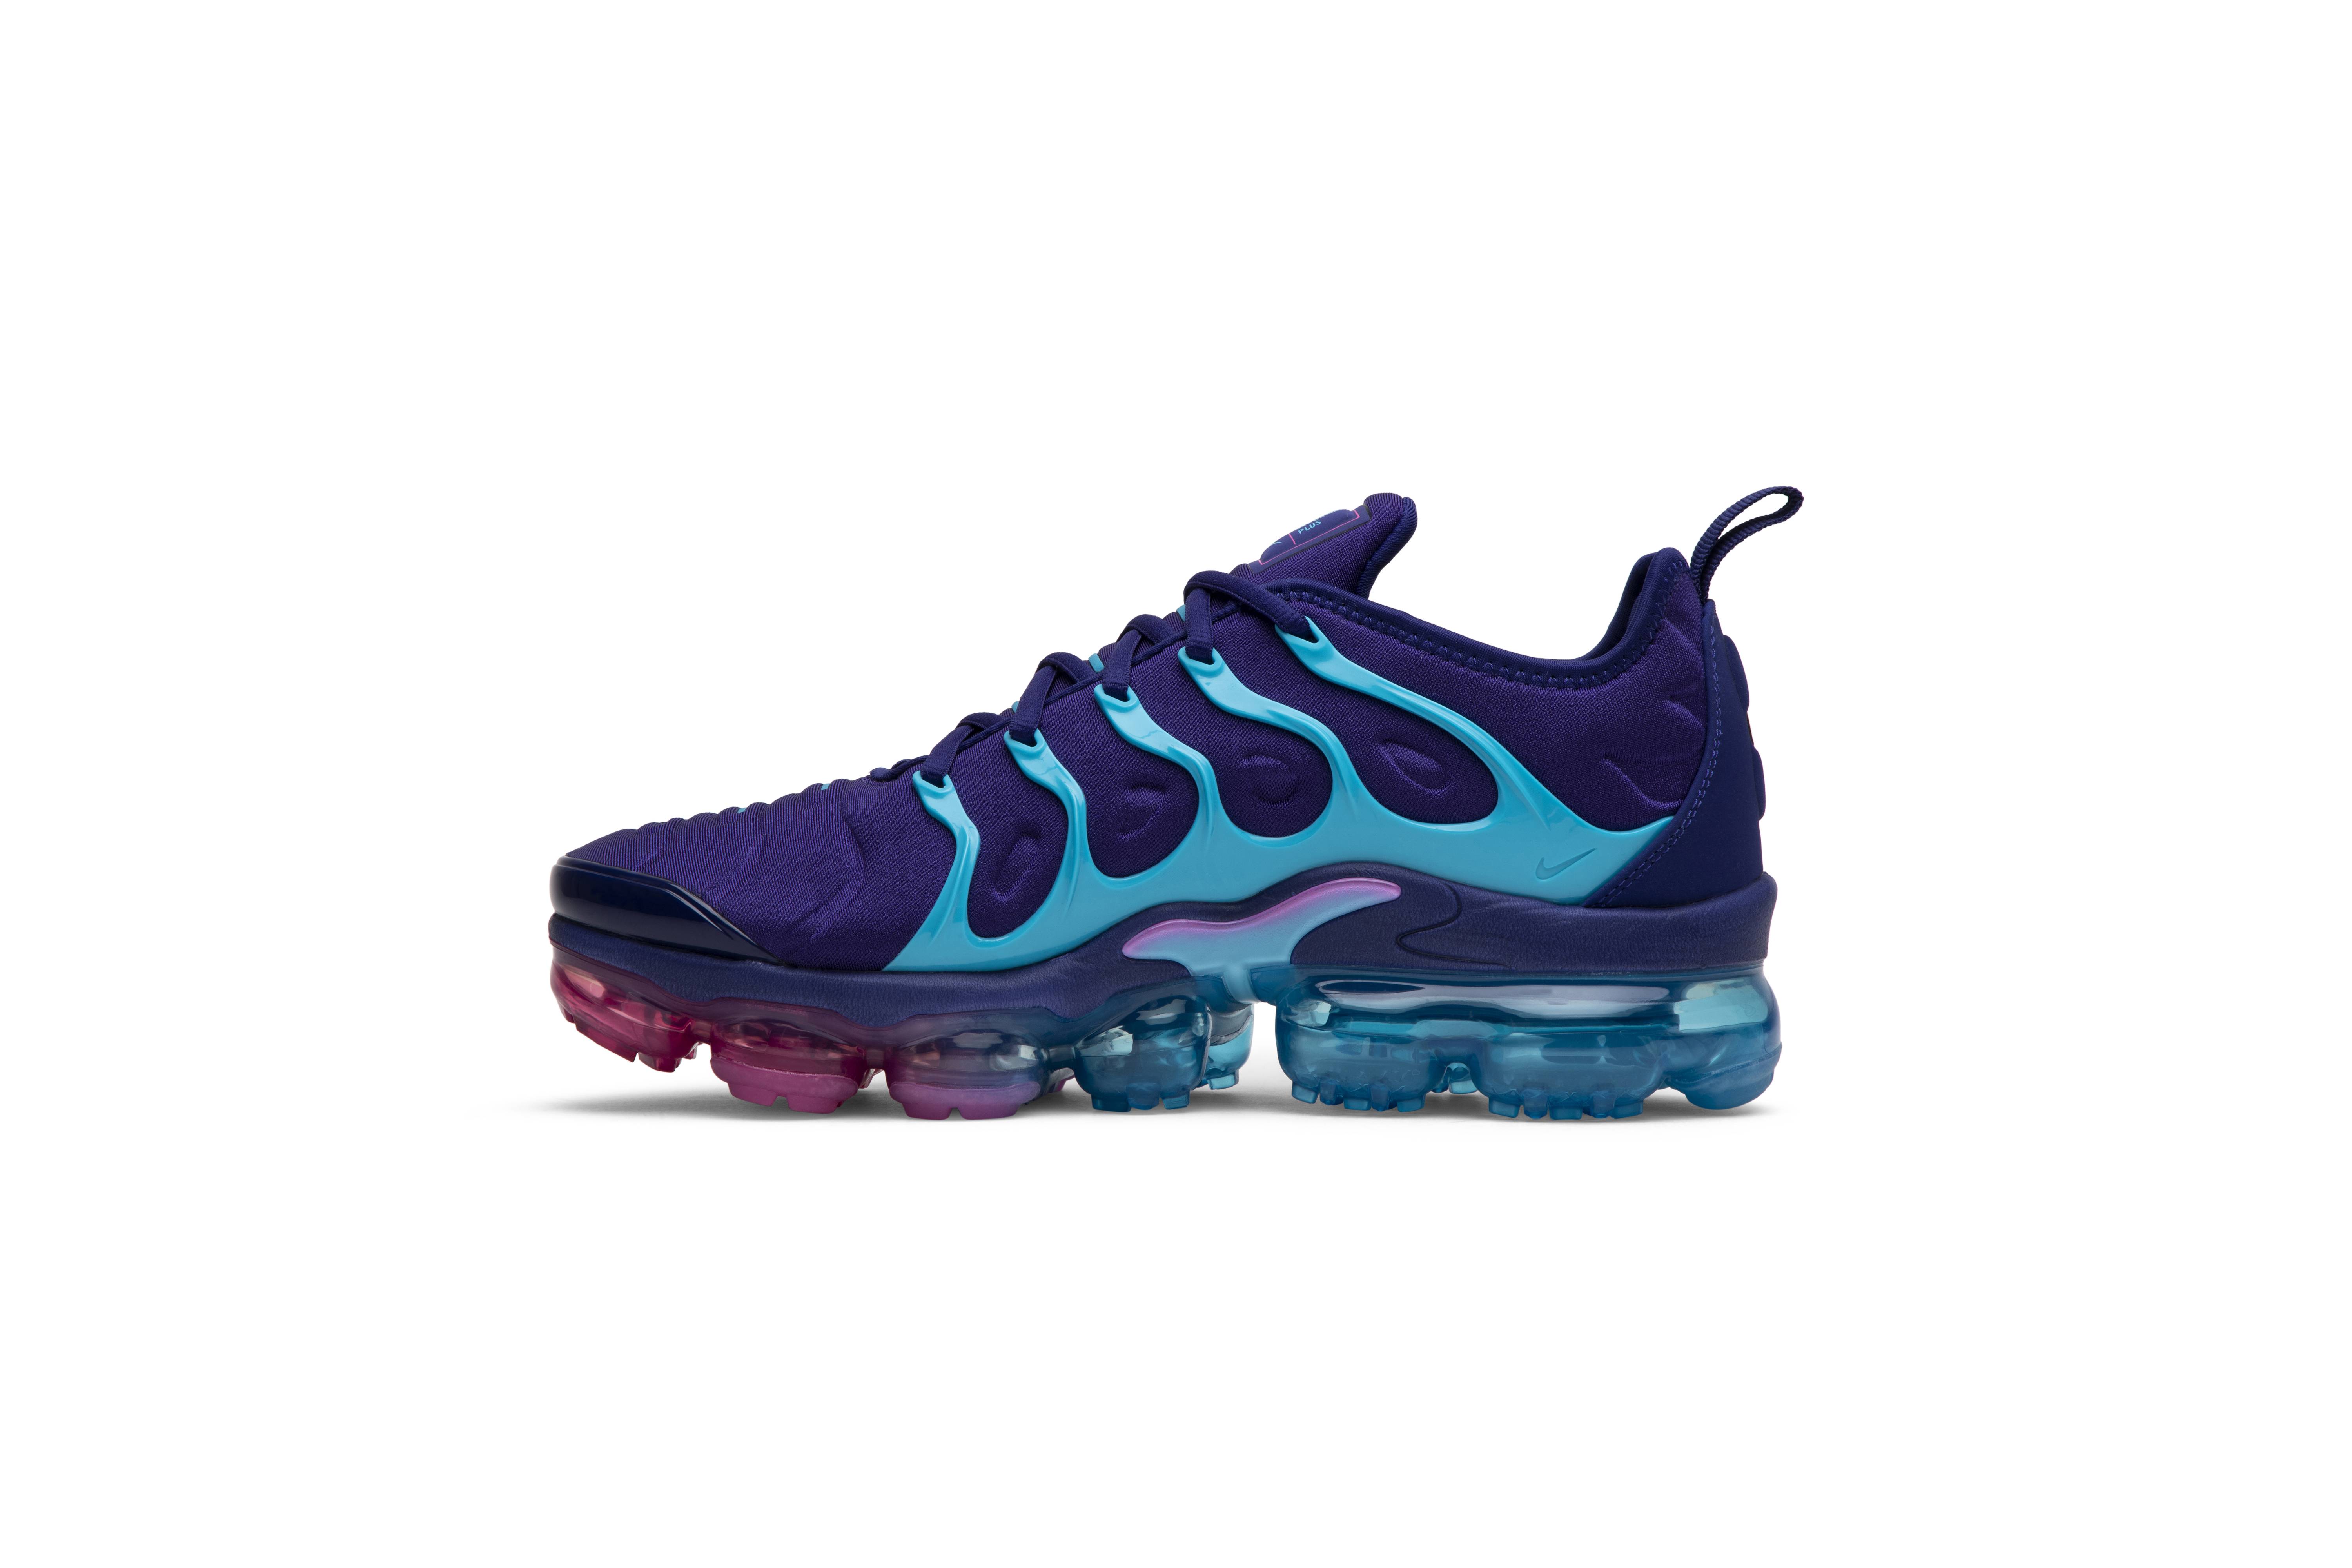 vapormax teal and purple